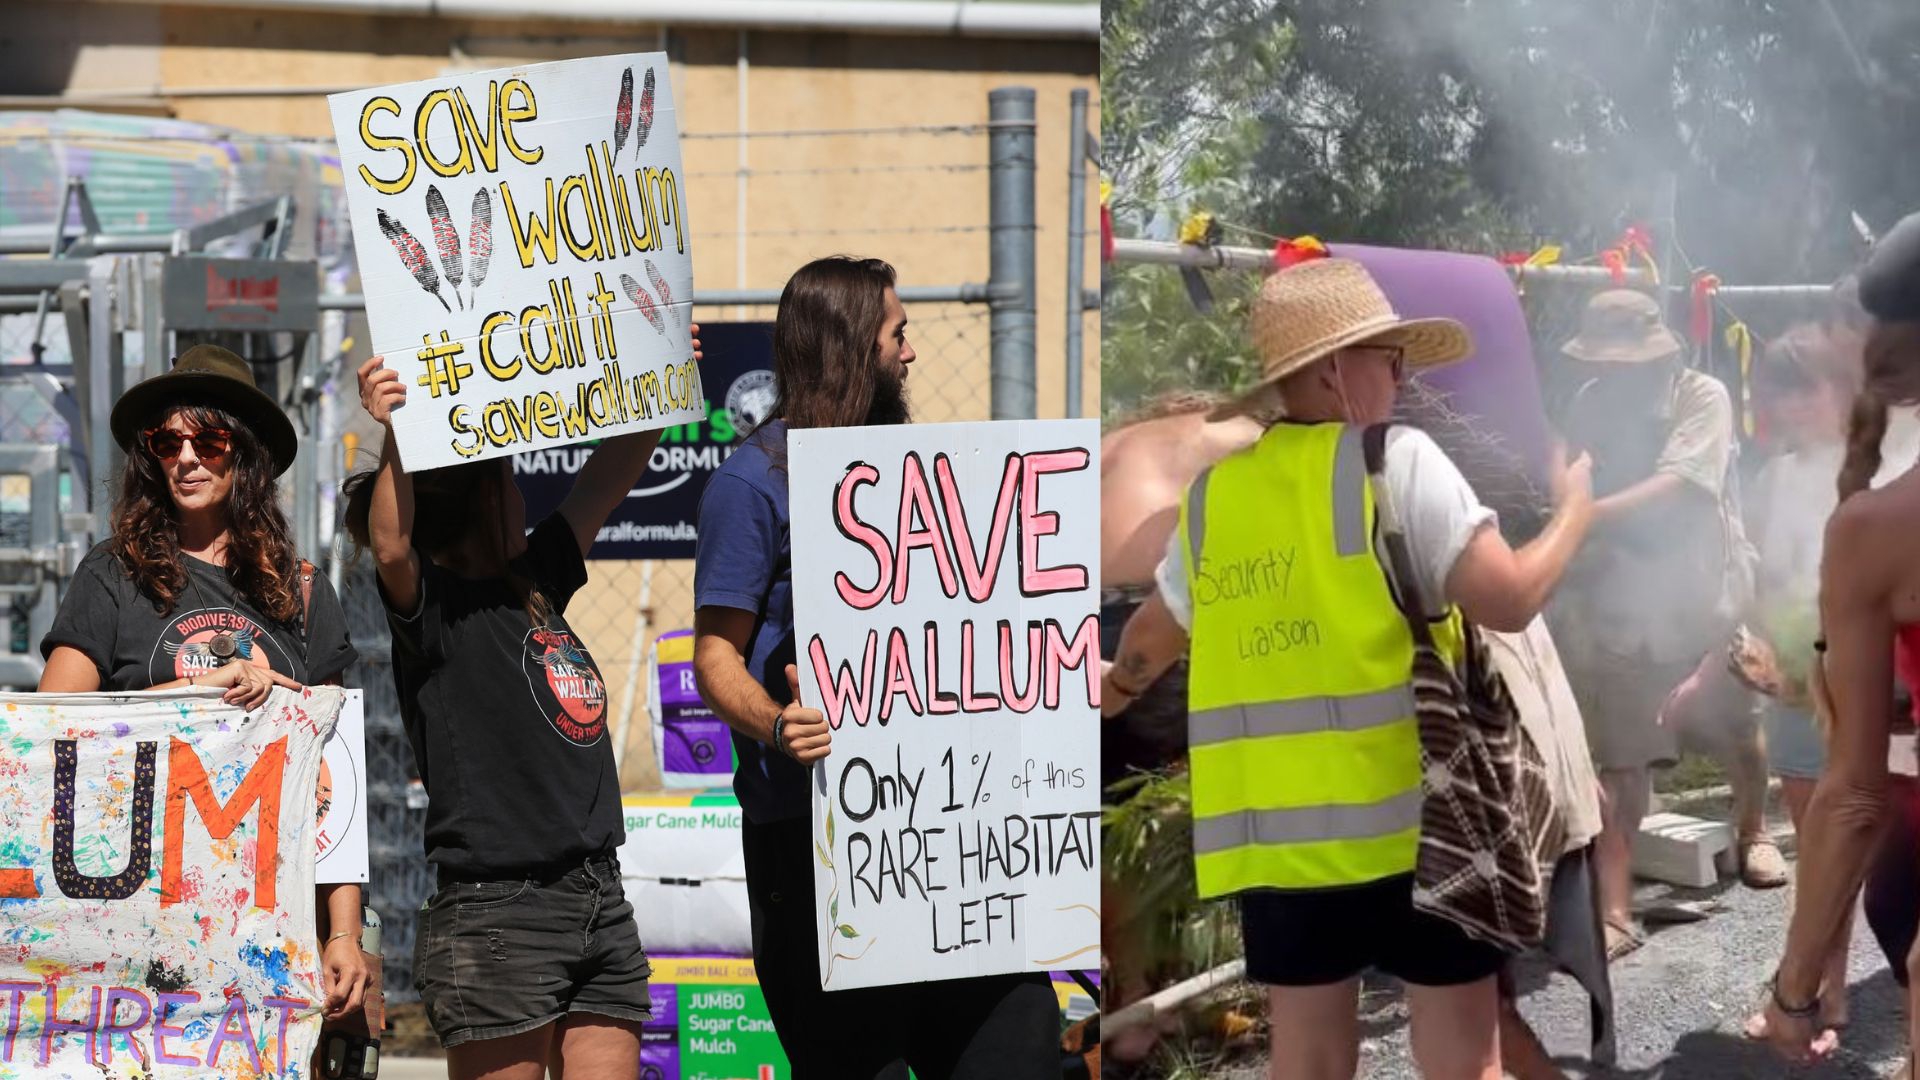 Protestors rally to save Wallum nature reserve